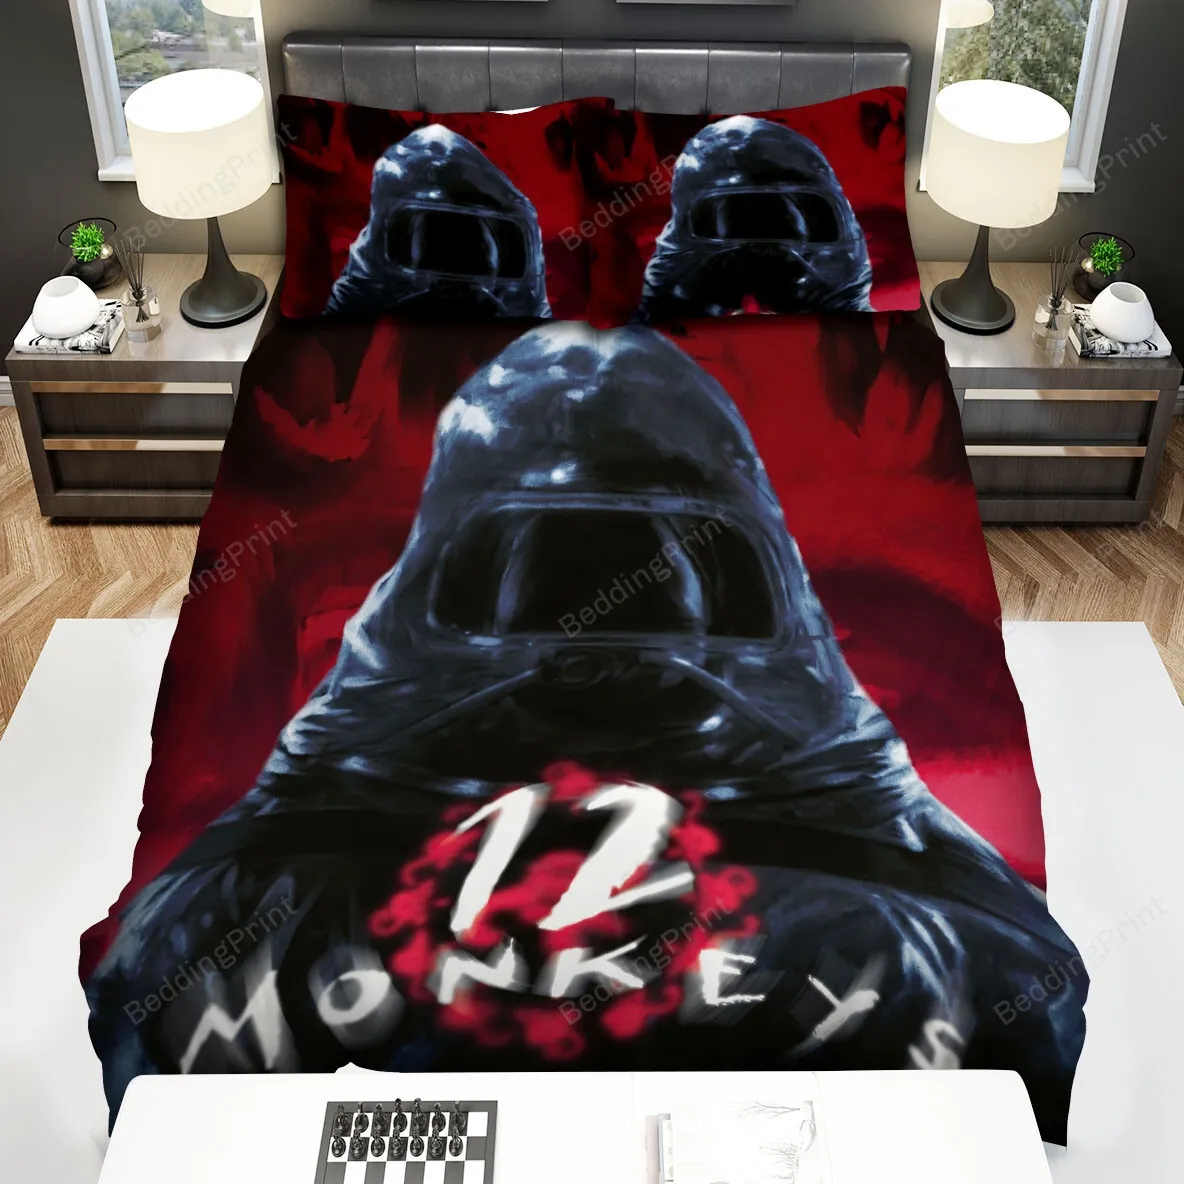 12 Monkeys (20152018) The Future Is History Movie Poster Bed Sheets Spread Comforter Duvet Cover Bedding Sets